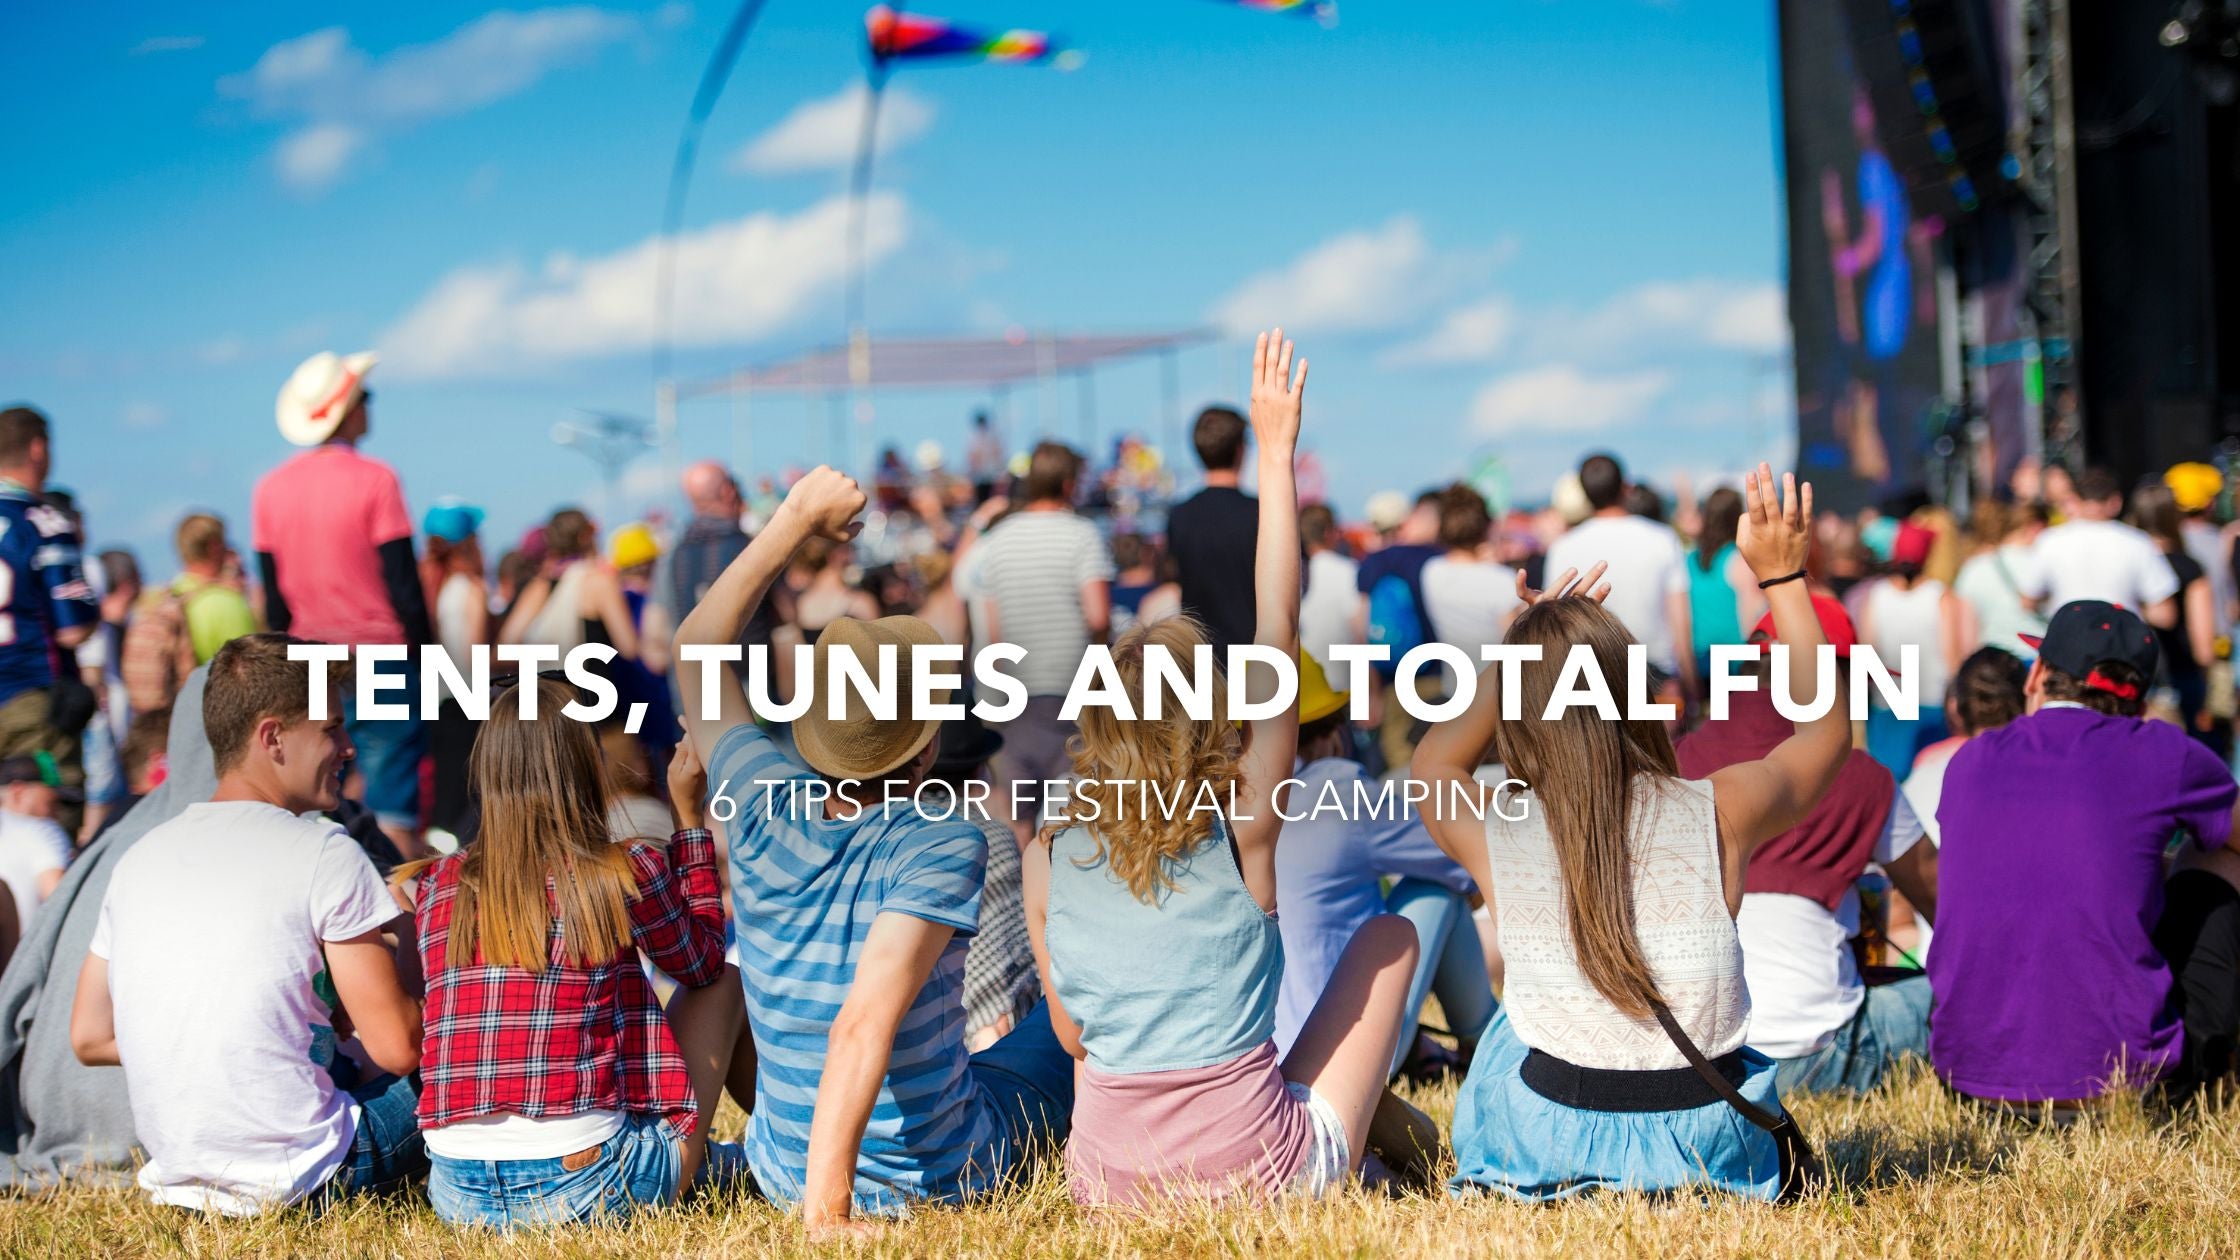 Tents, Tunes, and Total Fun - 6 Tips for Festival Camping